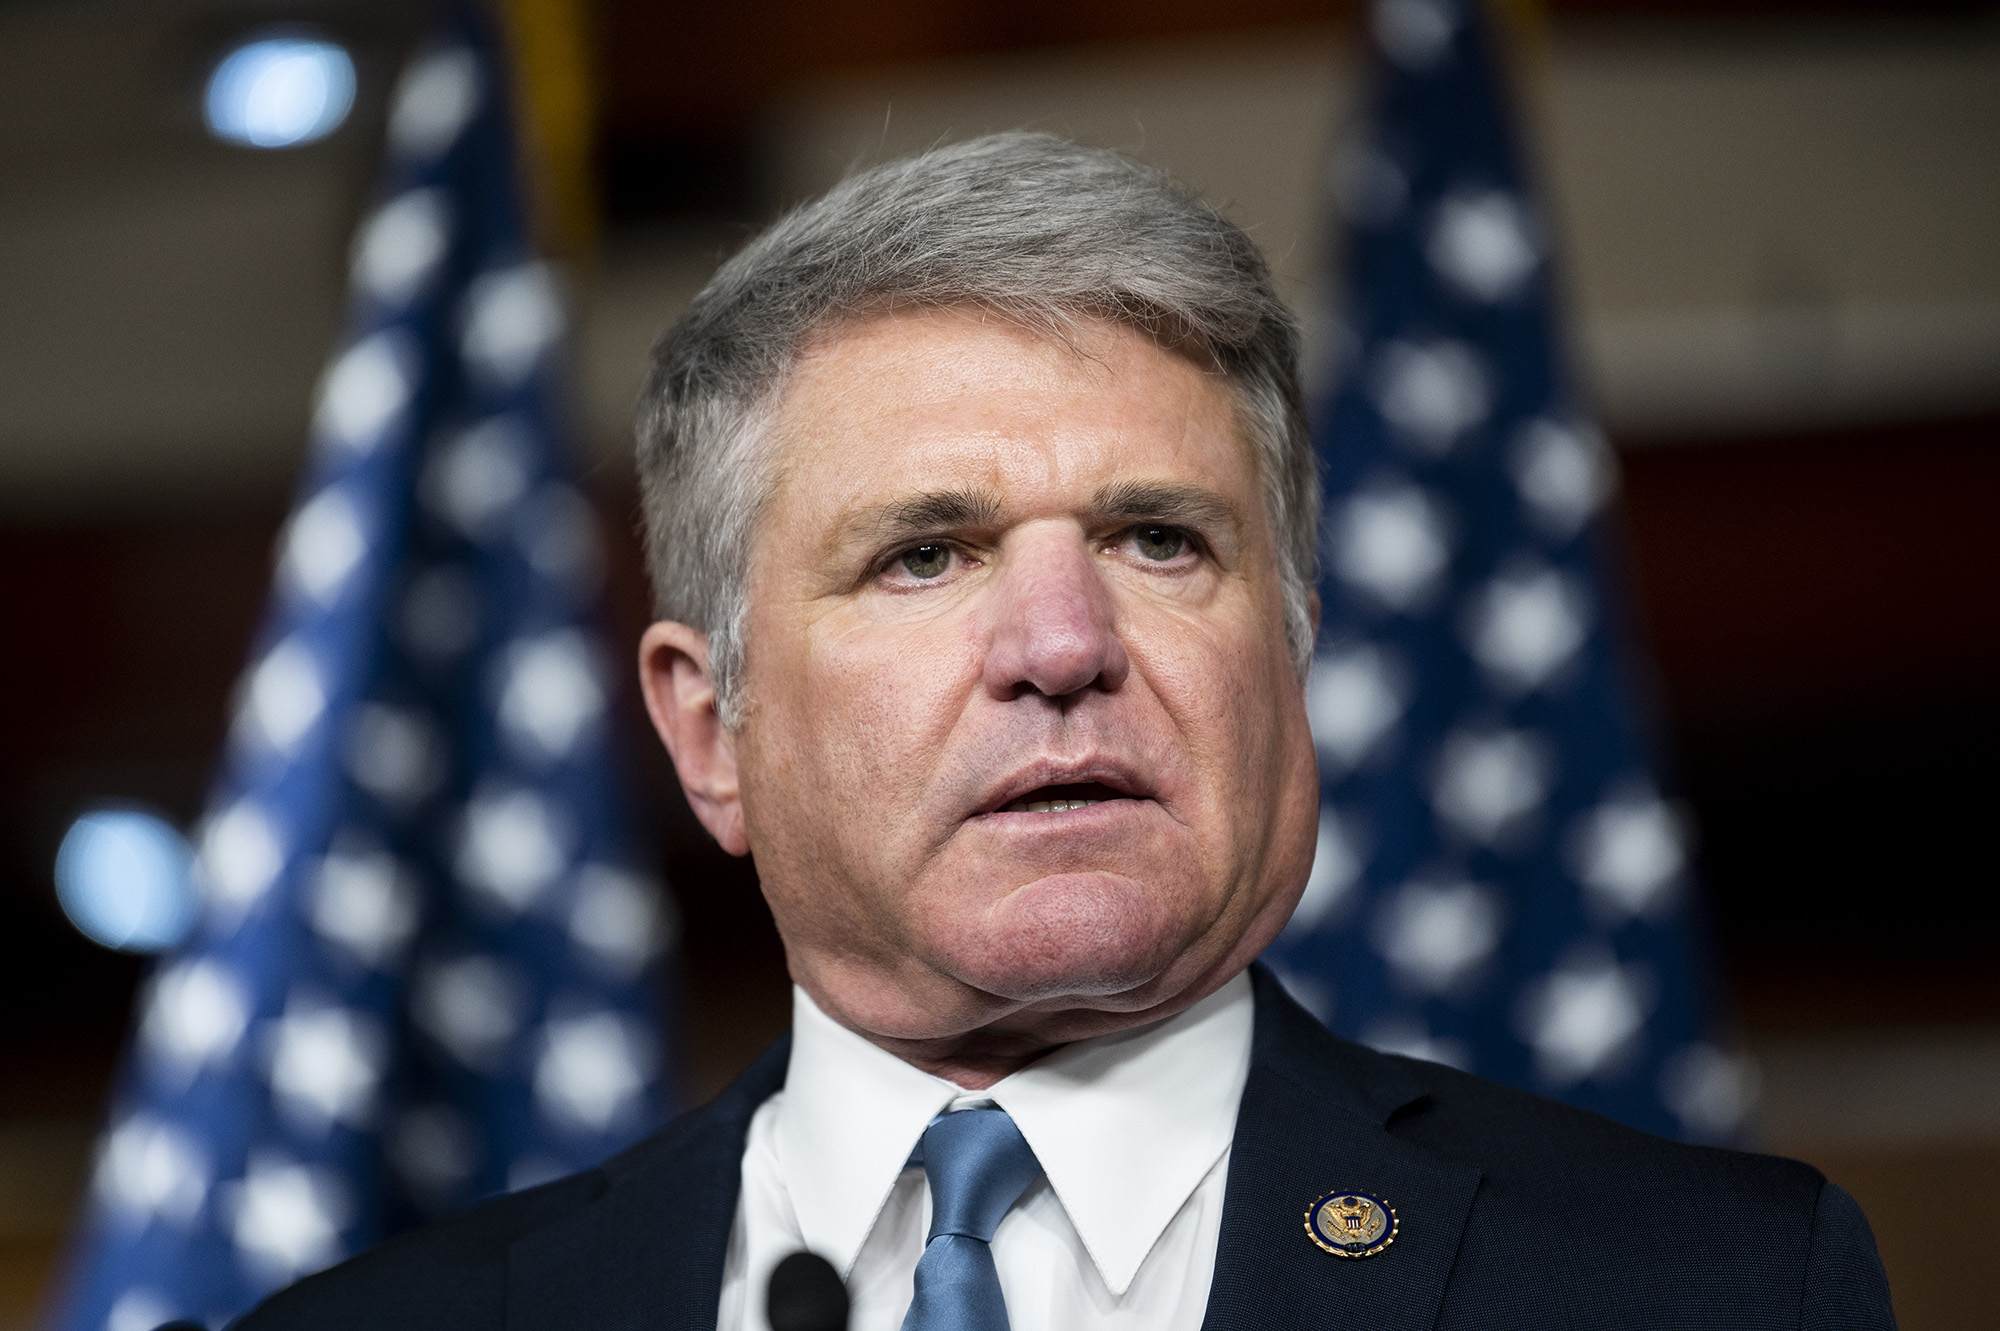 Rep. Michael McCaul, R-Texas, attends a news conference in the Capitol, Washington D.C, on February 2.